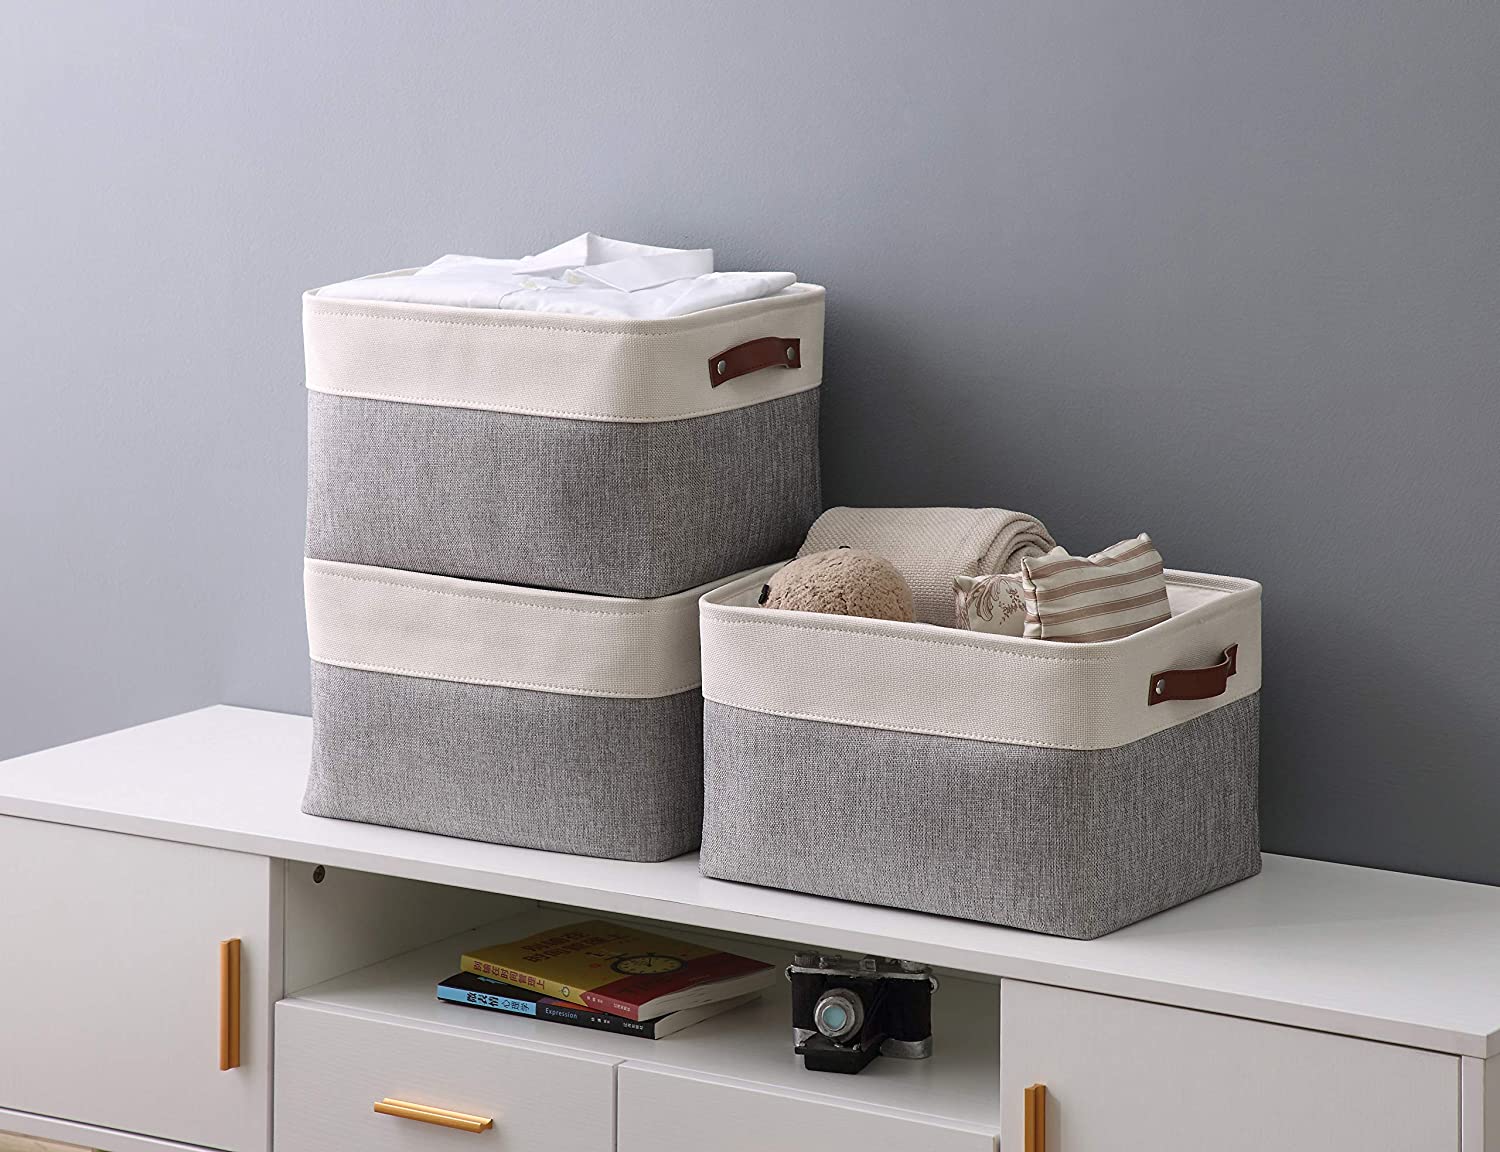 Woven Storage Box Tote Containers for Nursery EZOWare Set of 8 Organiser Basket Bins Closet Dresser Gray and White Home Organisation Assorted Size Drawer 